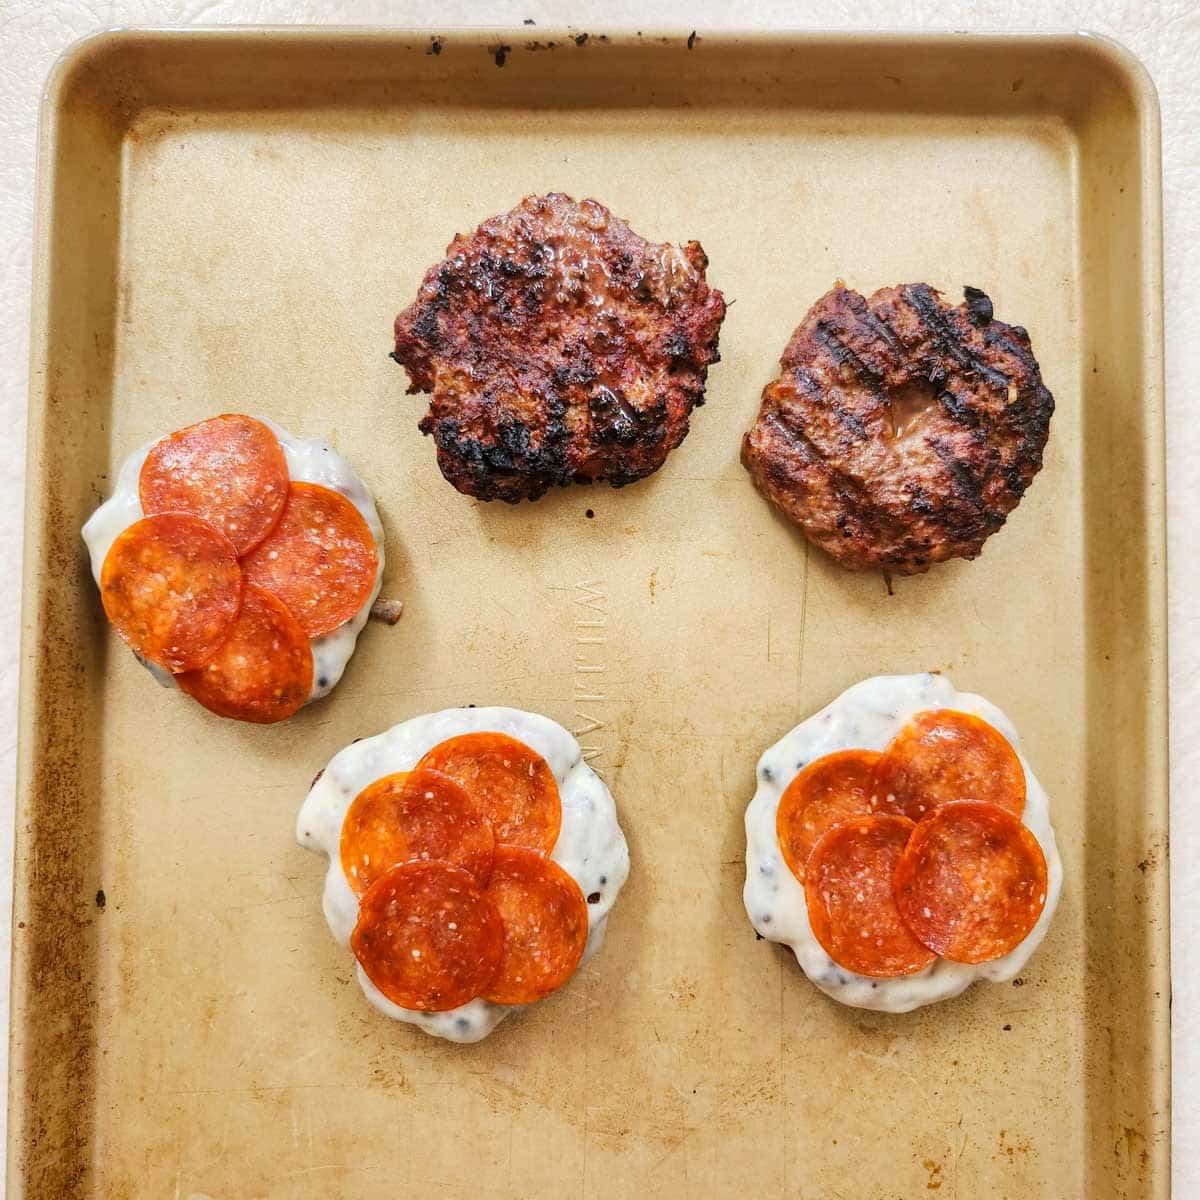 pizza burgers that have been grilled, some have cheese and pepperoni on top